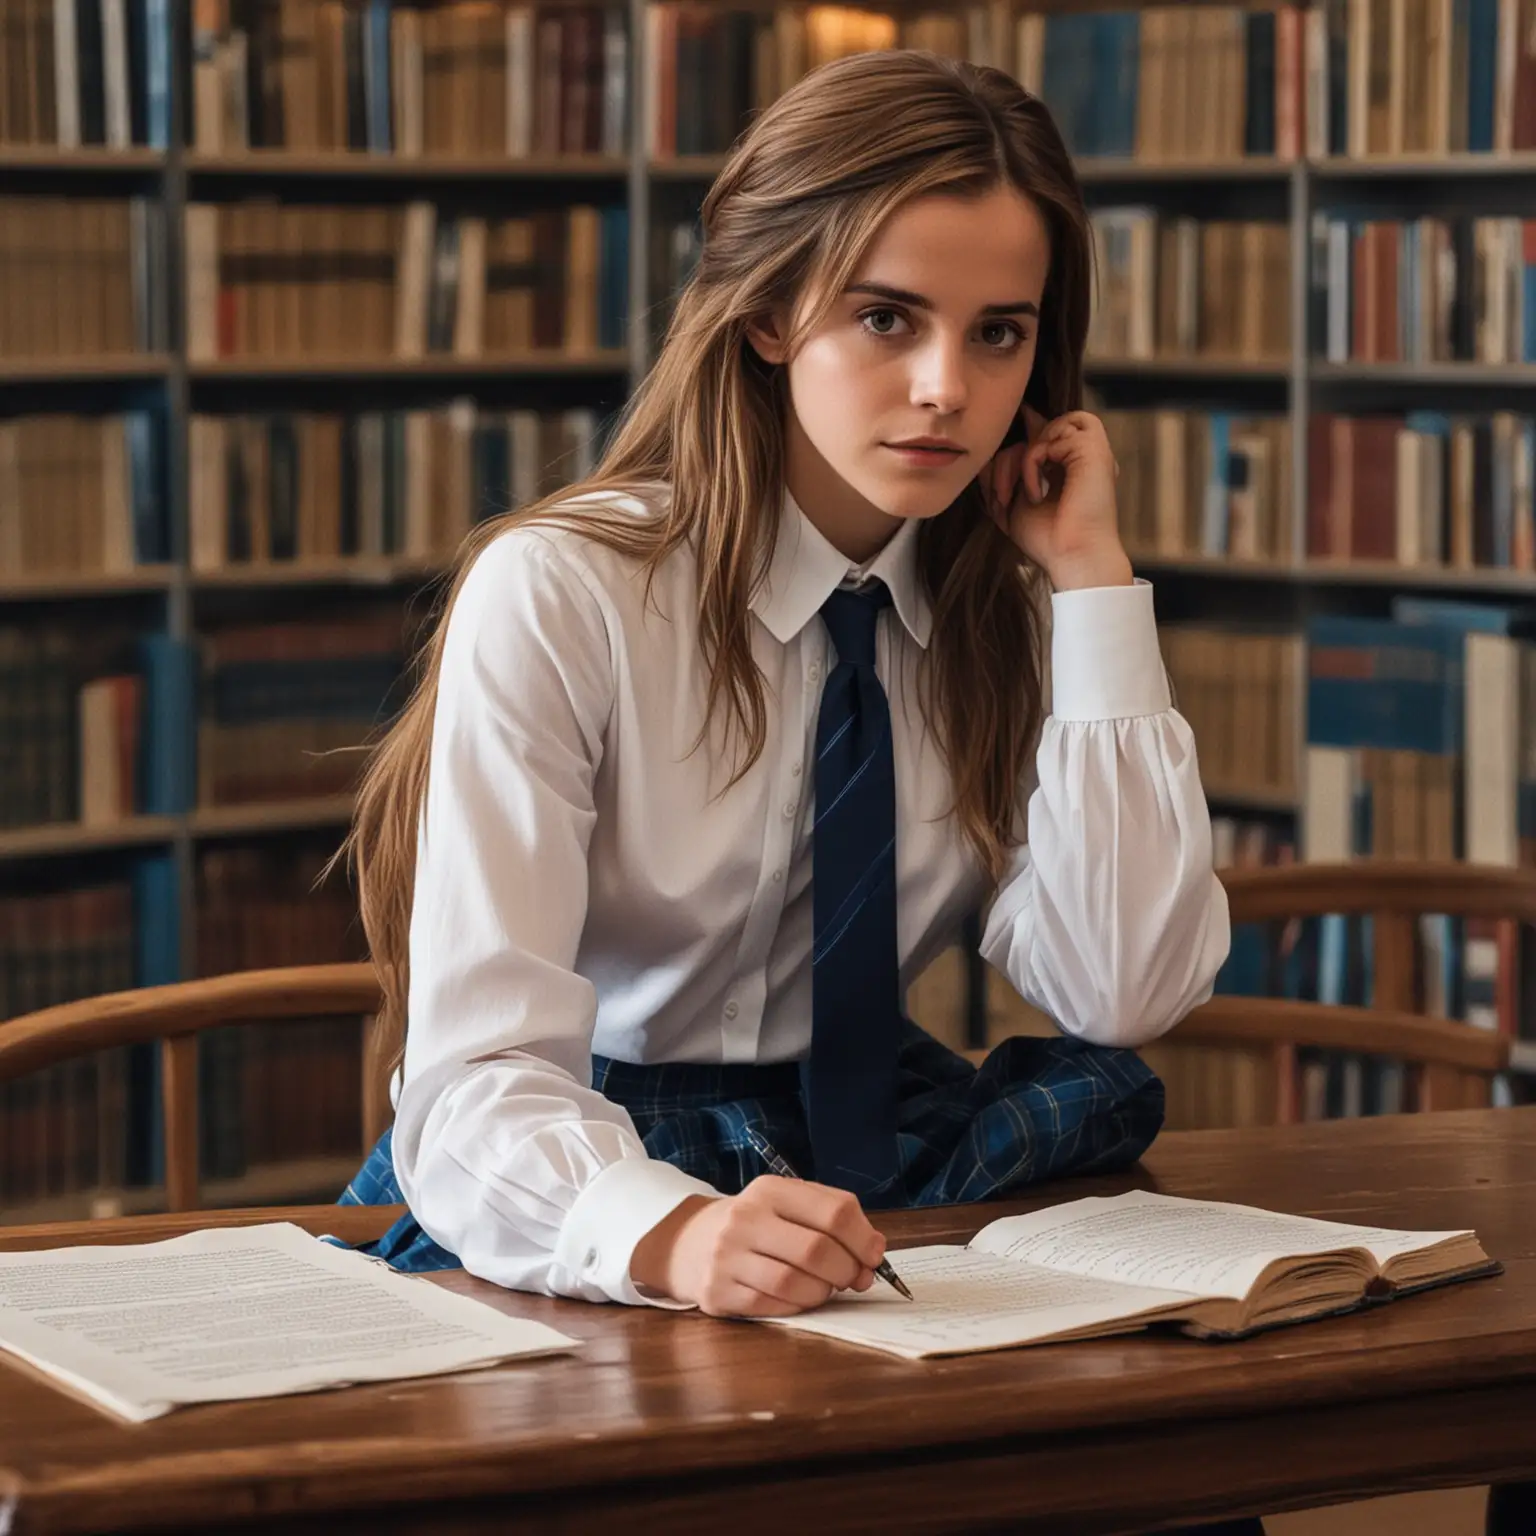 Emma Watson Writing Love Letter in Library